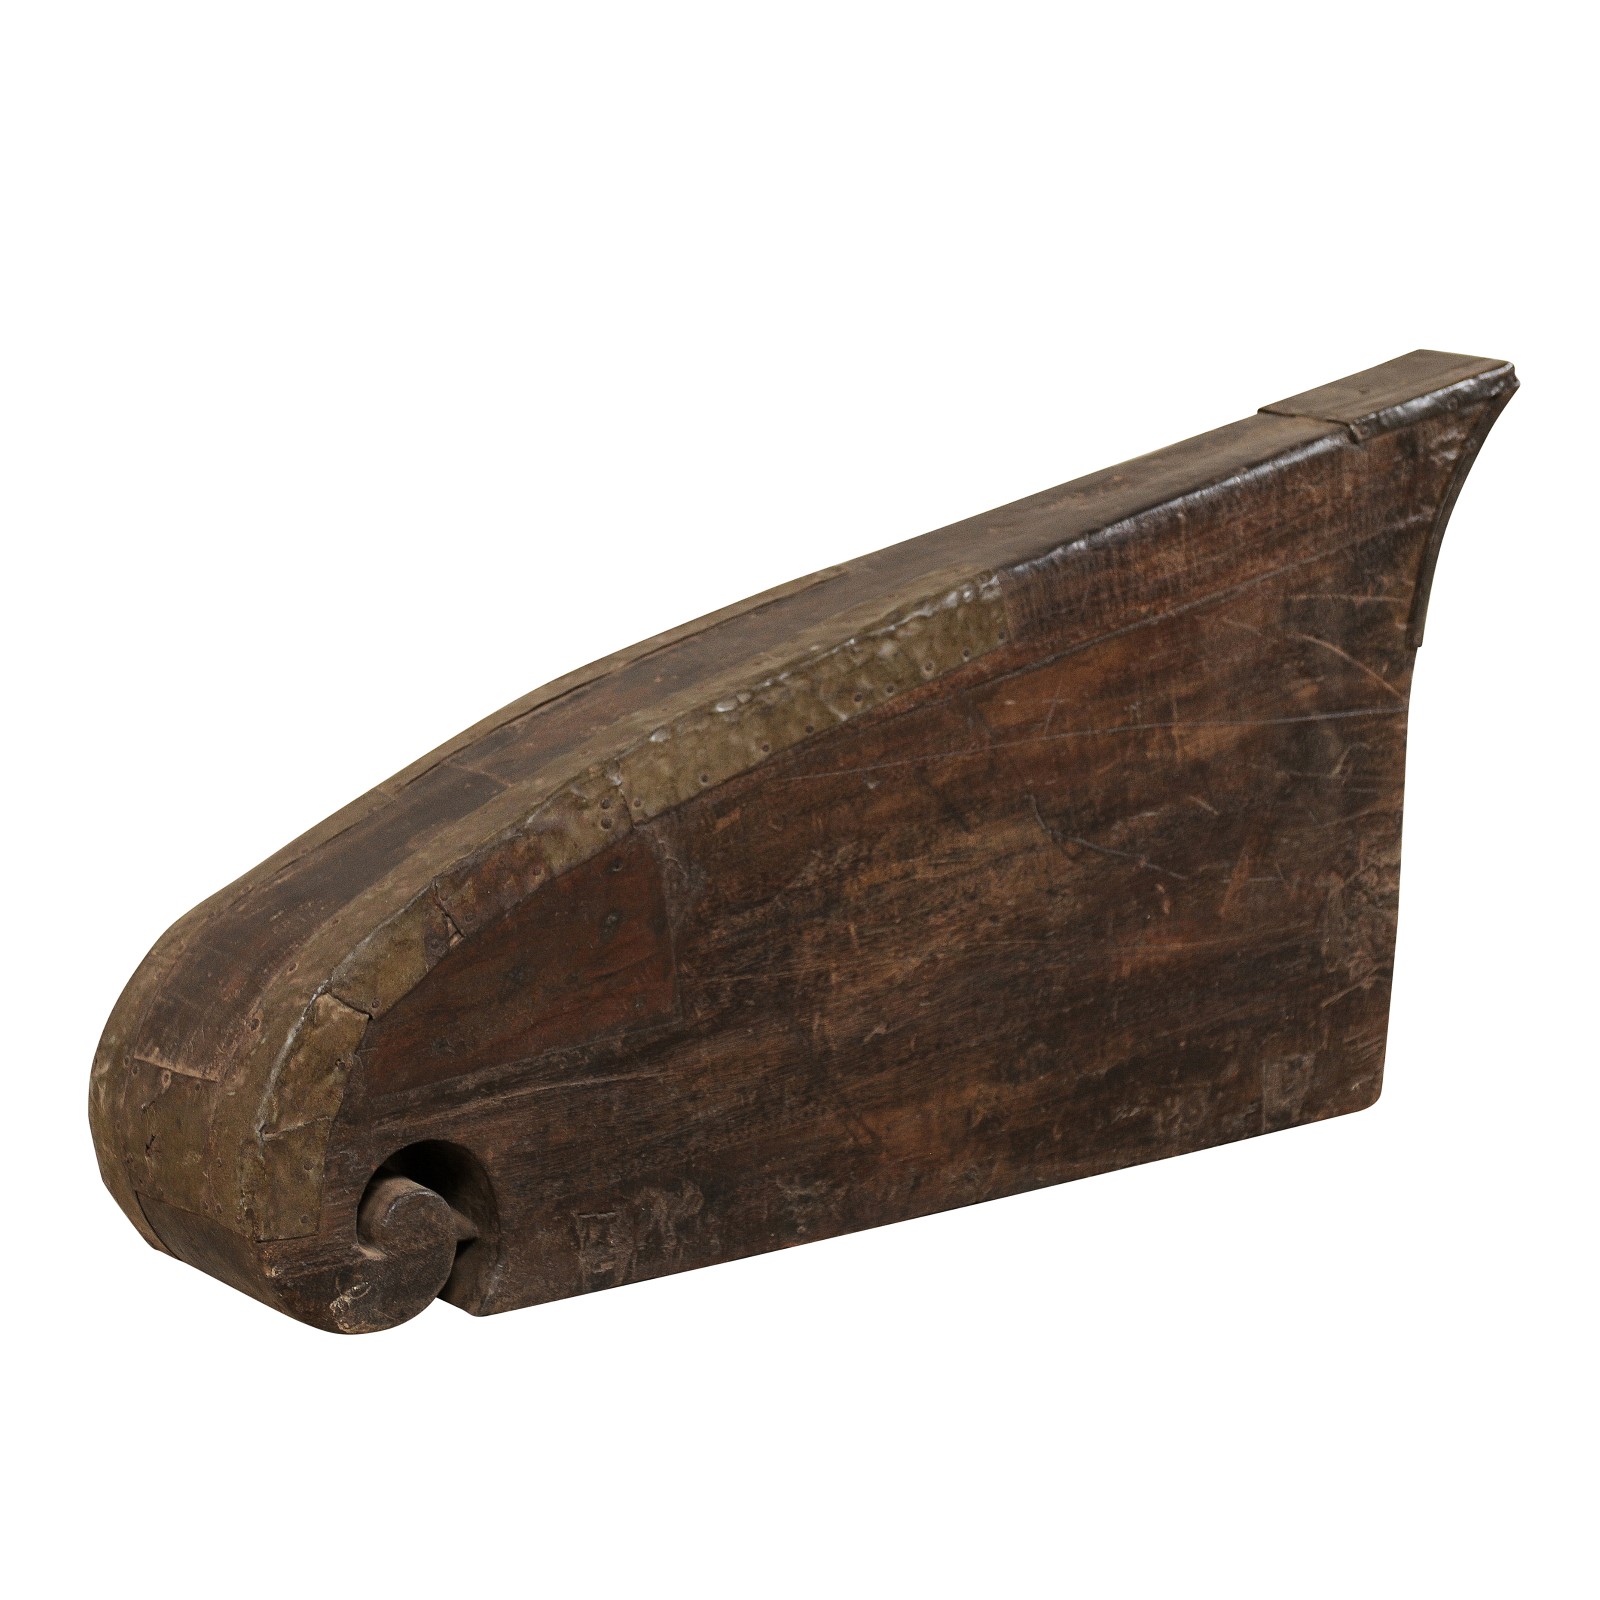 A Kerala India Wooden Boat Prow